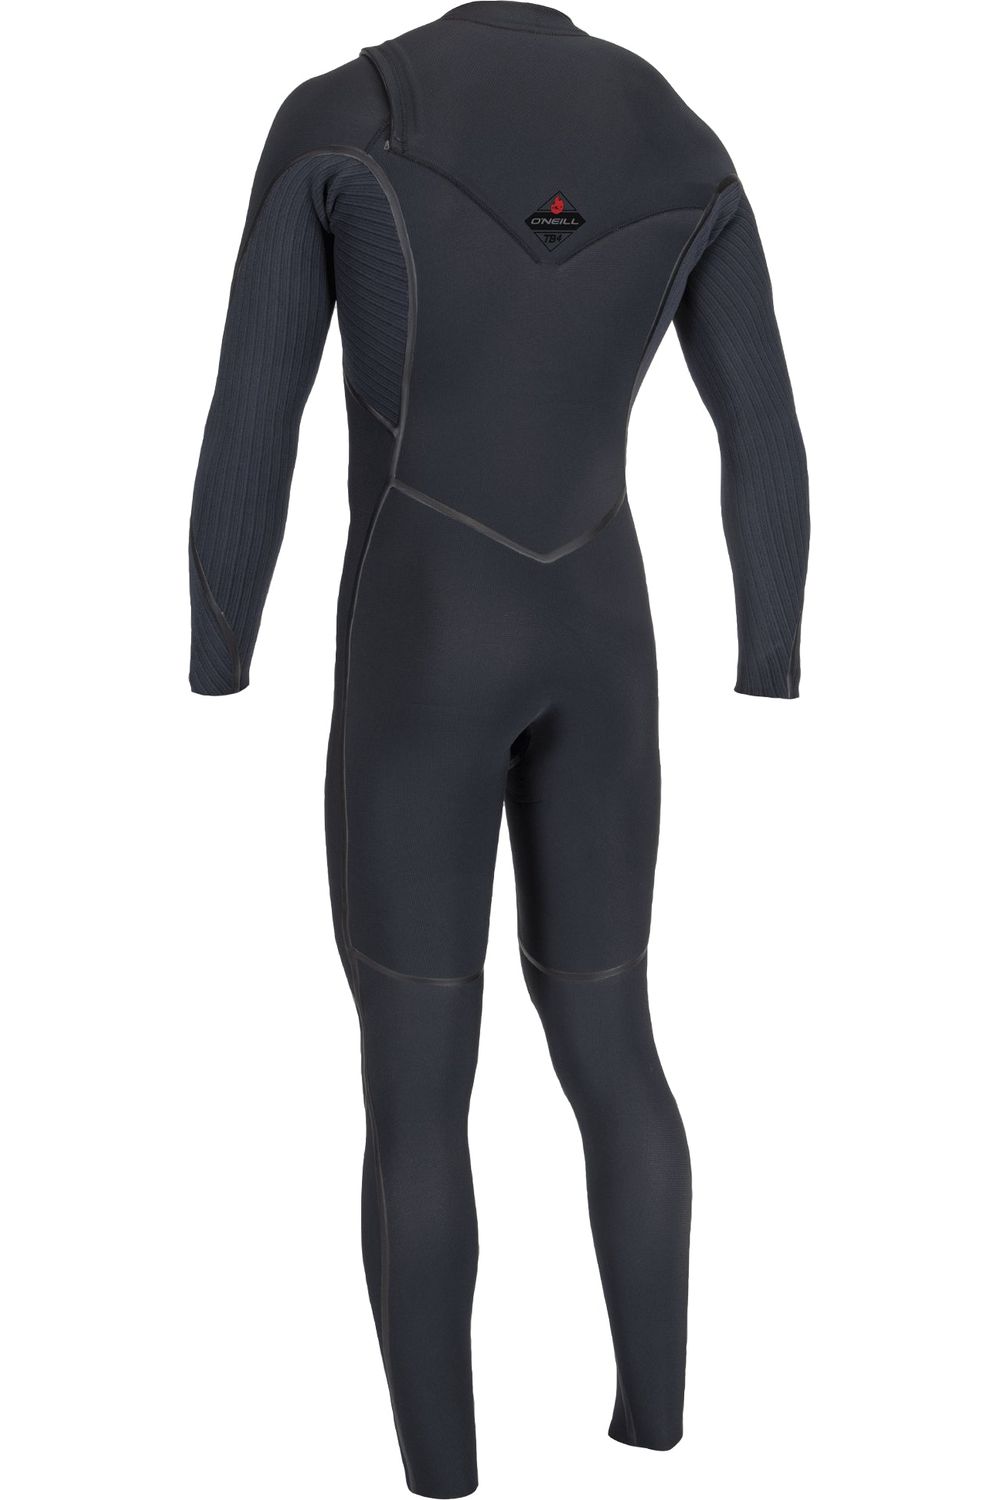 O'neill Hyperfreak Fire Wetsuit 4/3+ with Chest Zip from the ba ck